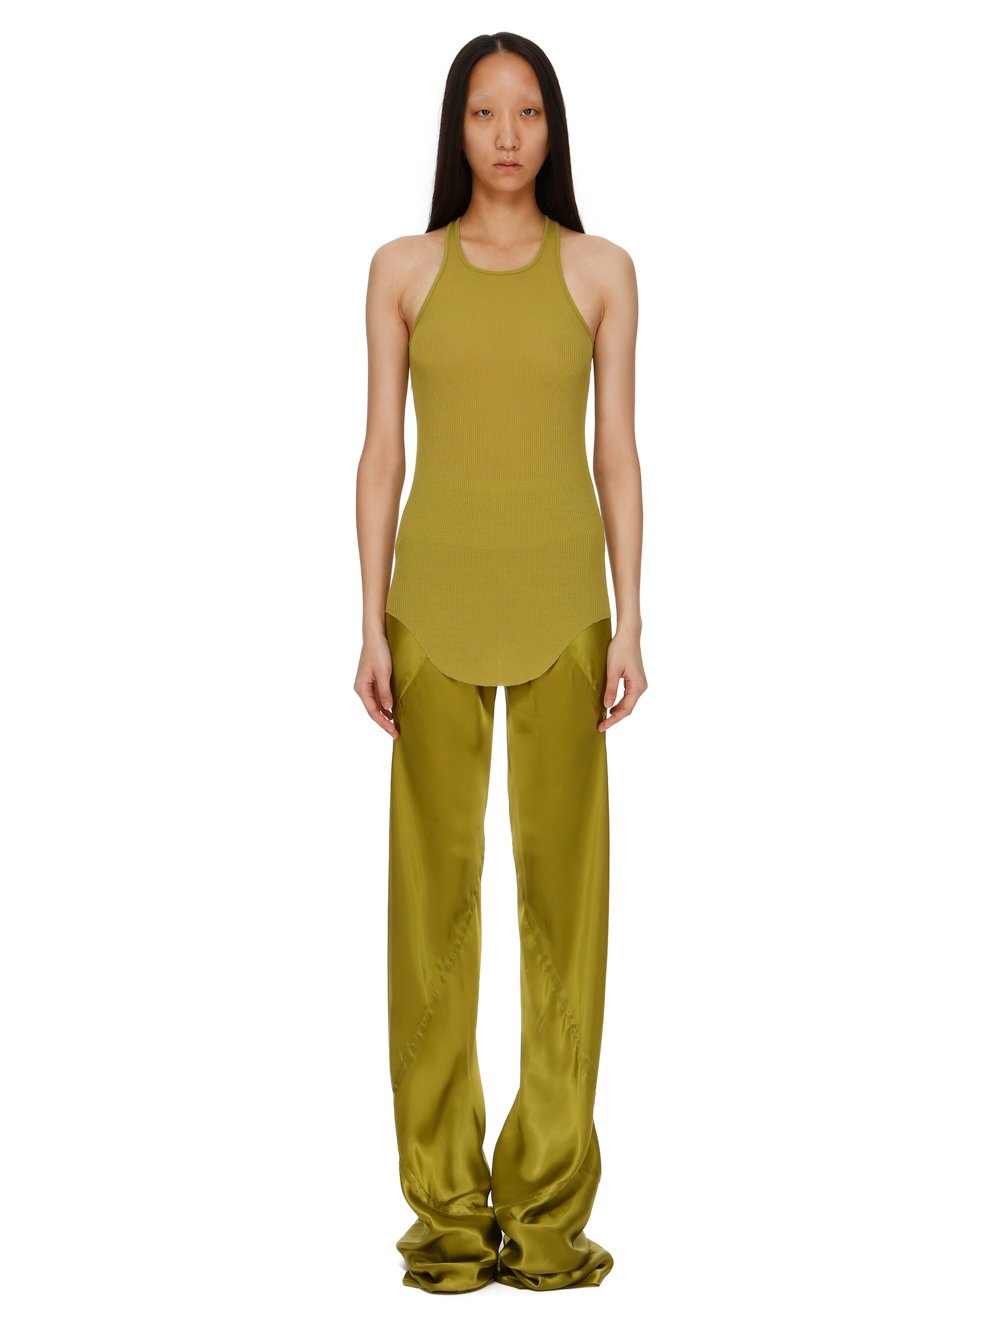 Rick Owens sheer-panelled design trousers - Yellow